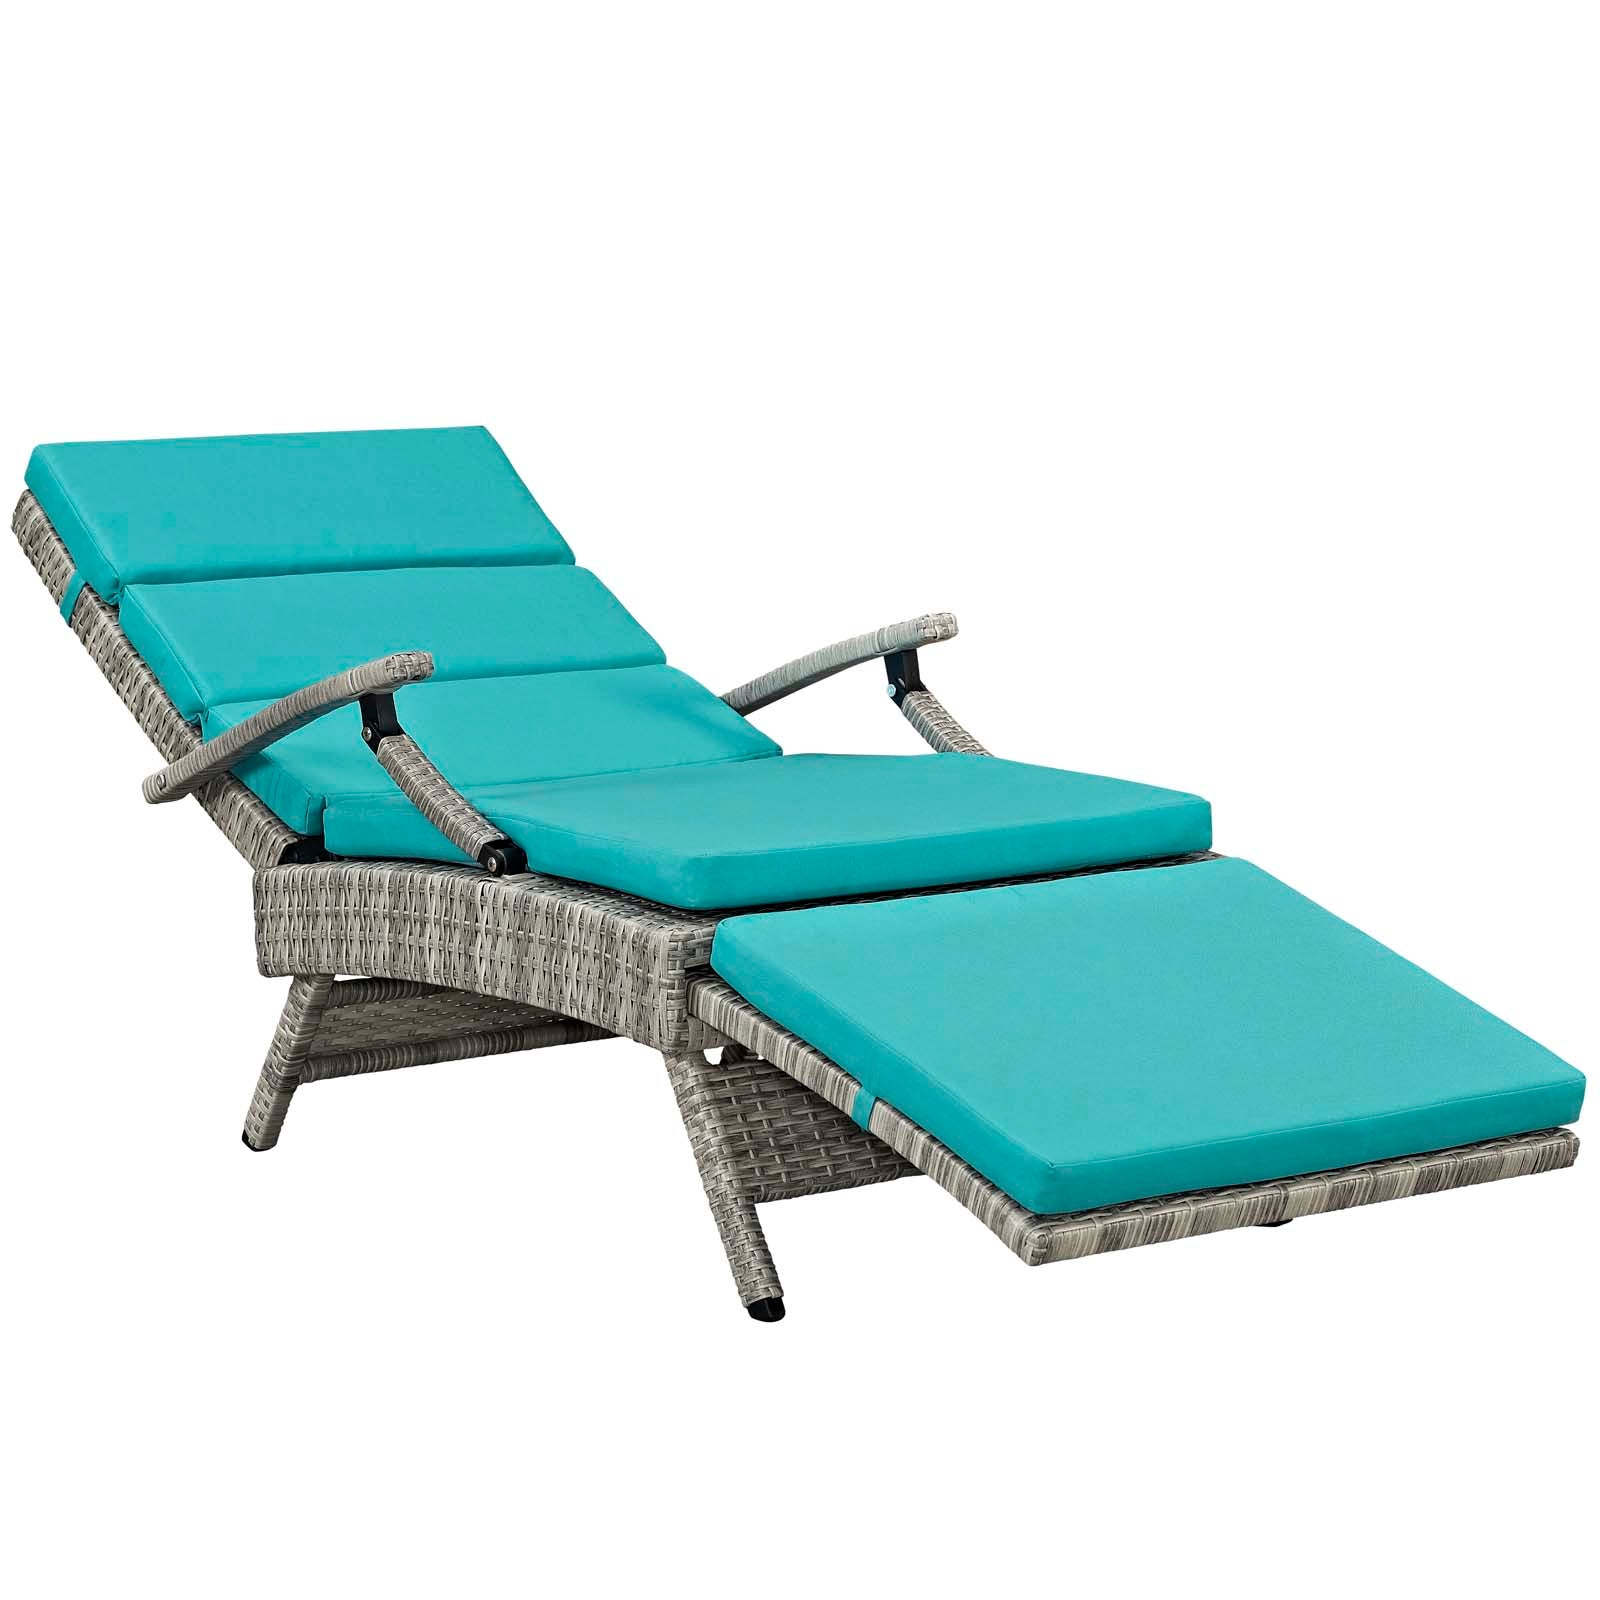 Modway - Envisage Chaise Outdoor Patio Wicker Rattan Lounge Chair - EEI-2301